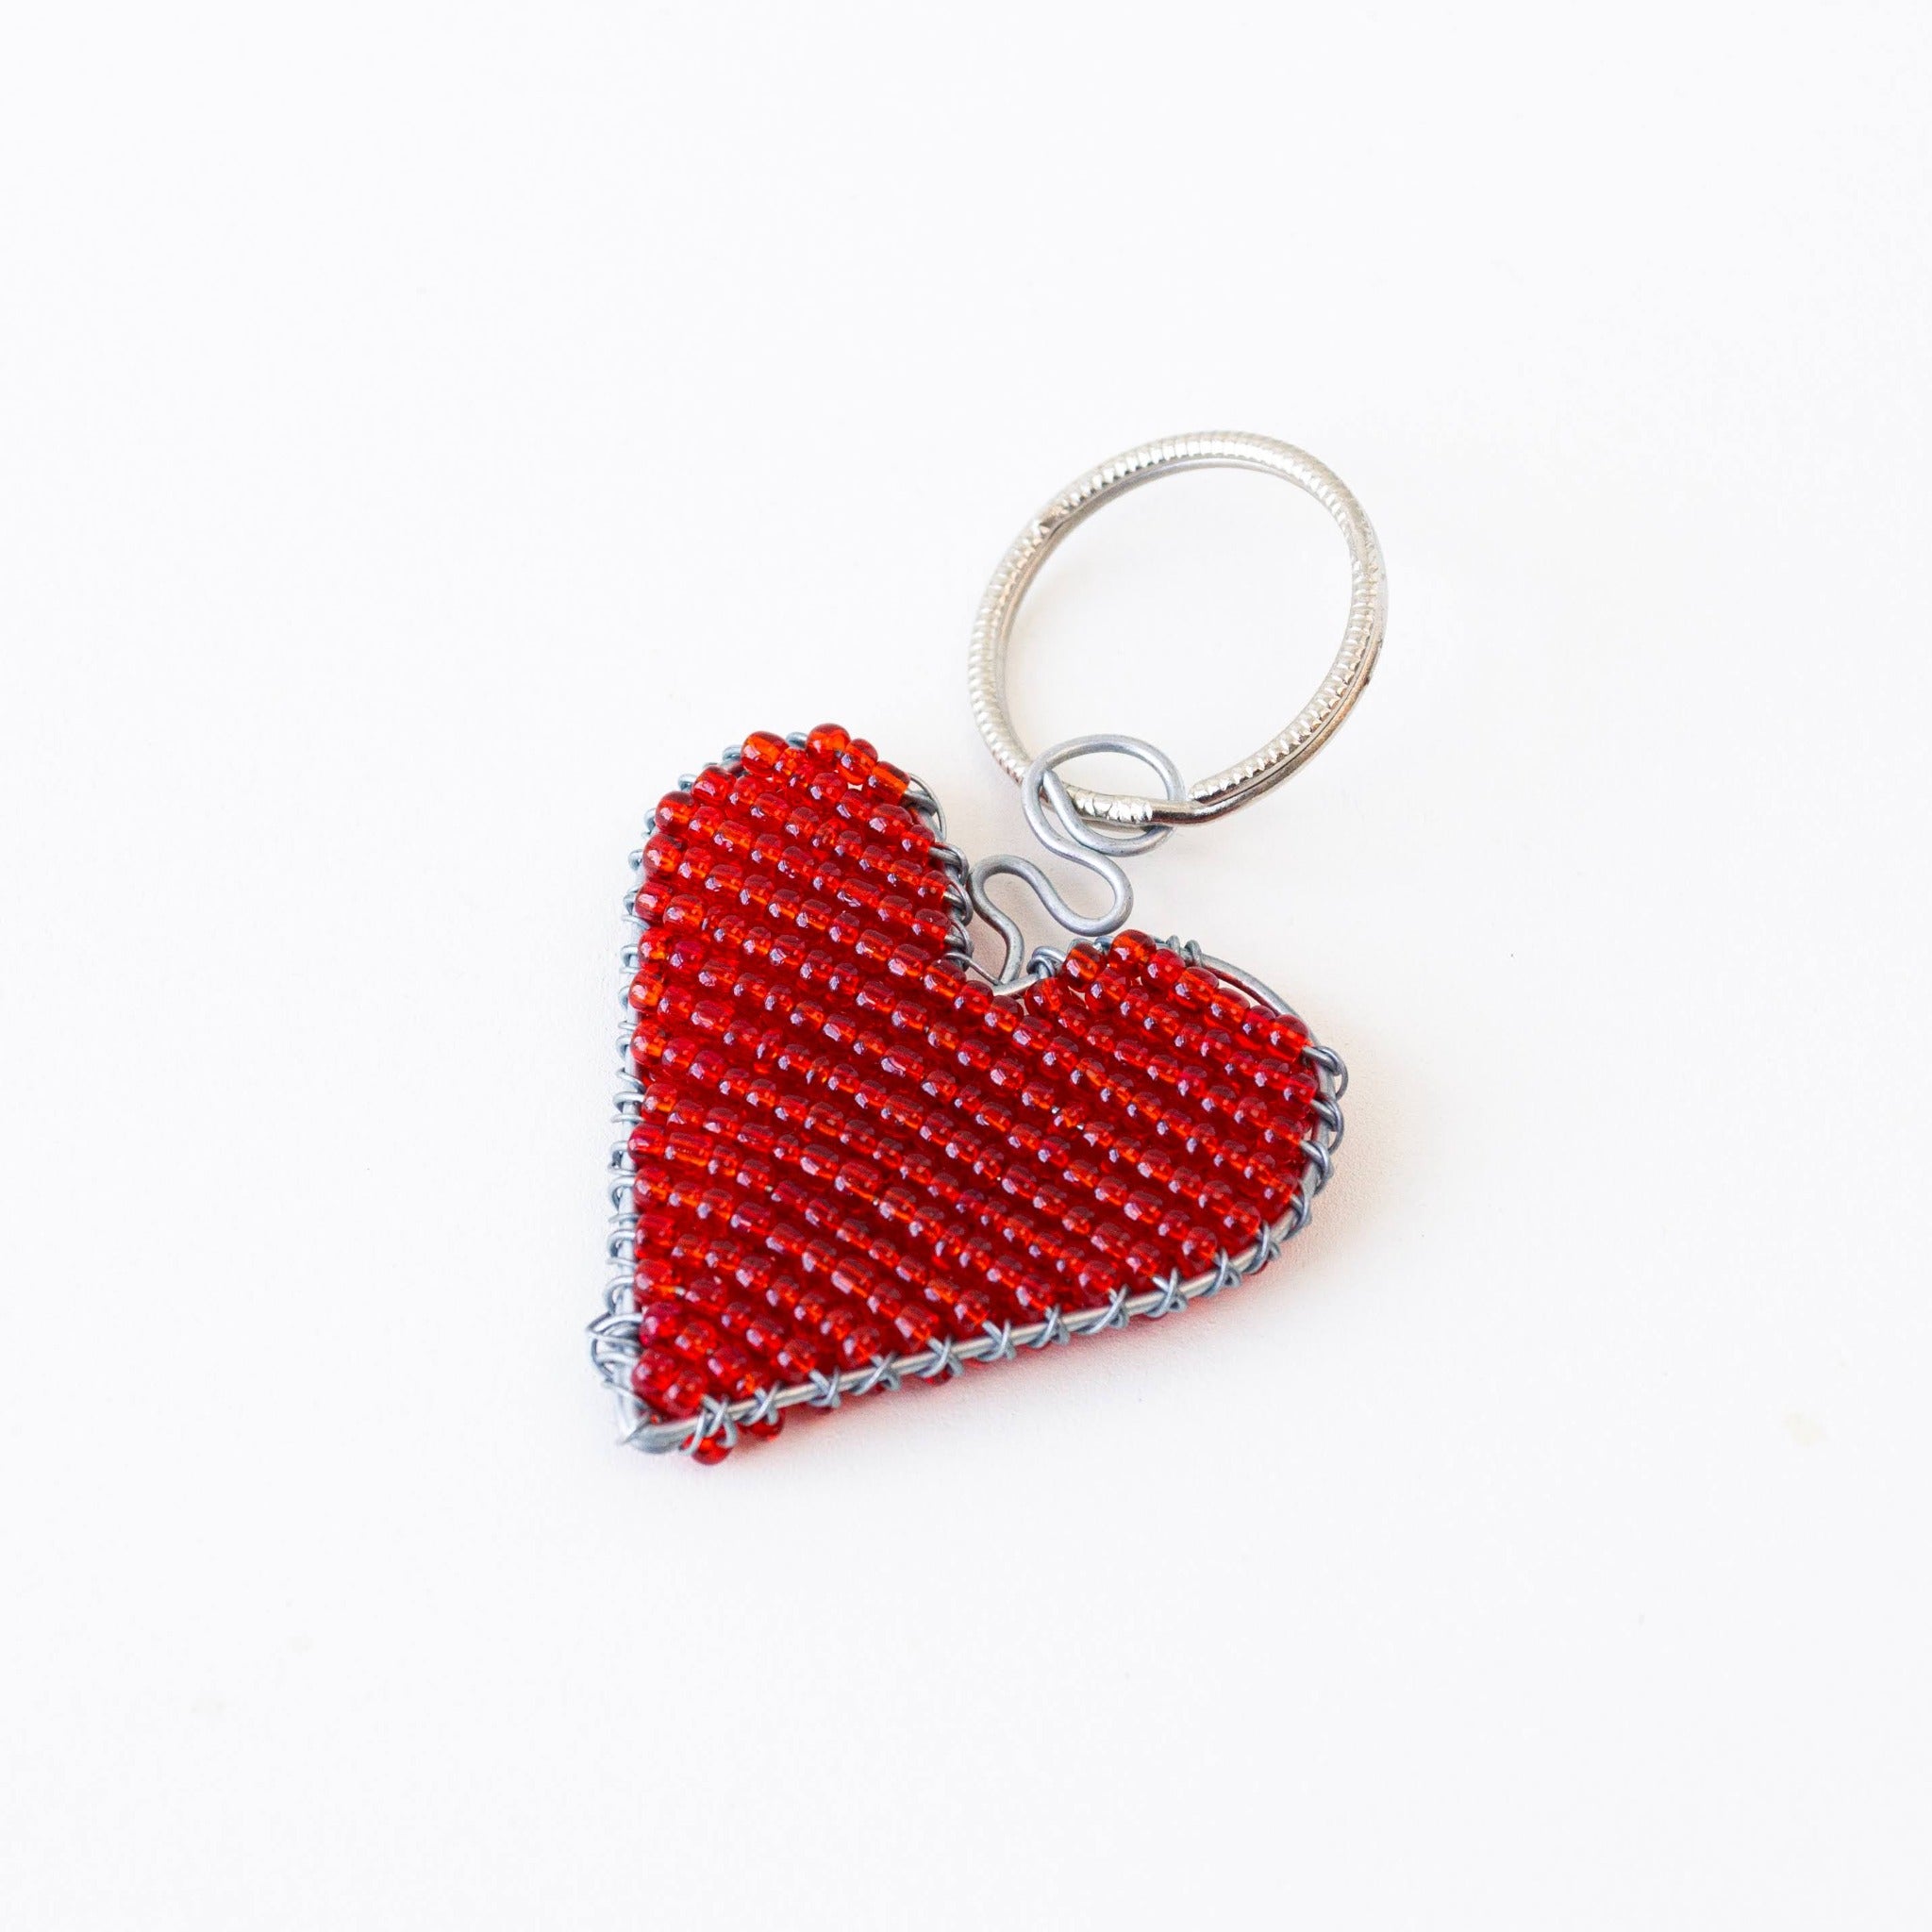 Beaded Keychains - Kenyan materials and design for a fair trade boutique